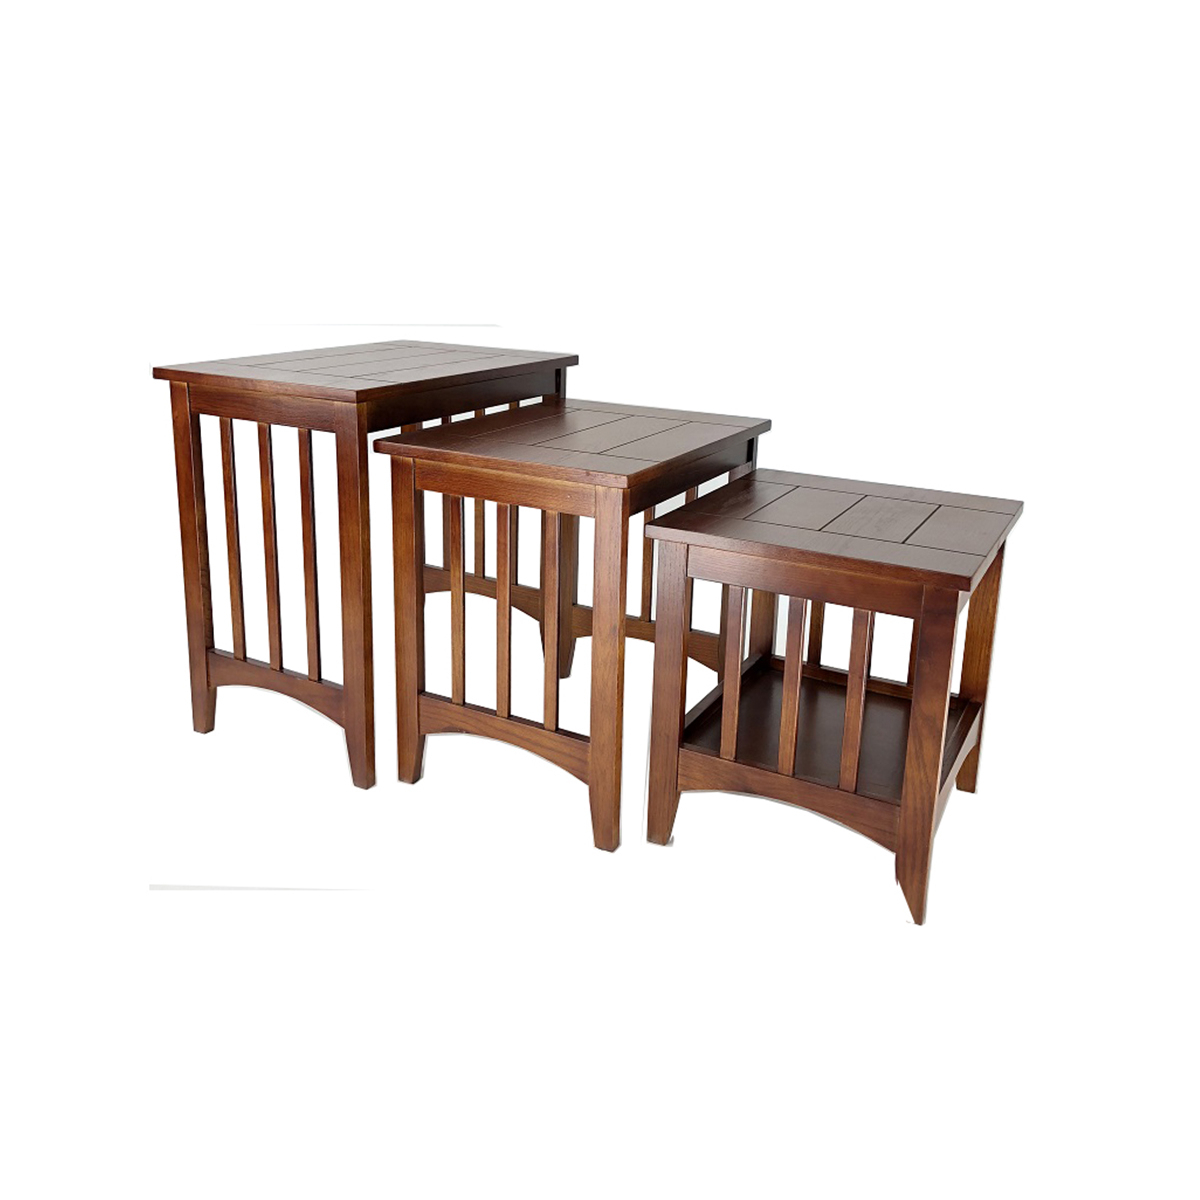 3 Piece Nesting Table With Plank Tabletop And Slatted Sides, Oak Brown- Saltoro Sherpi